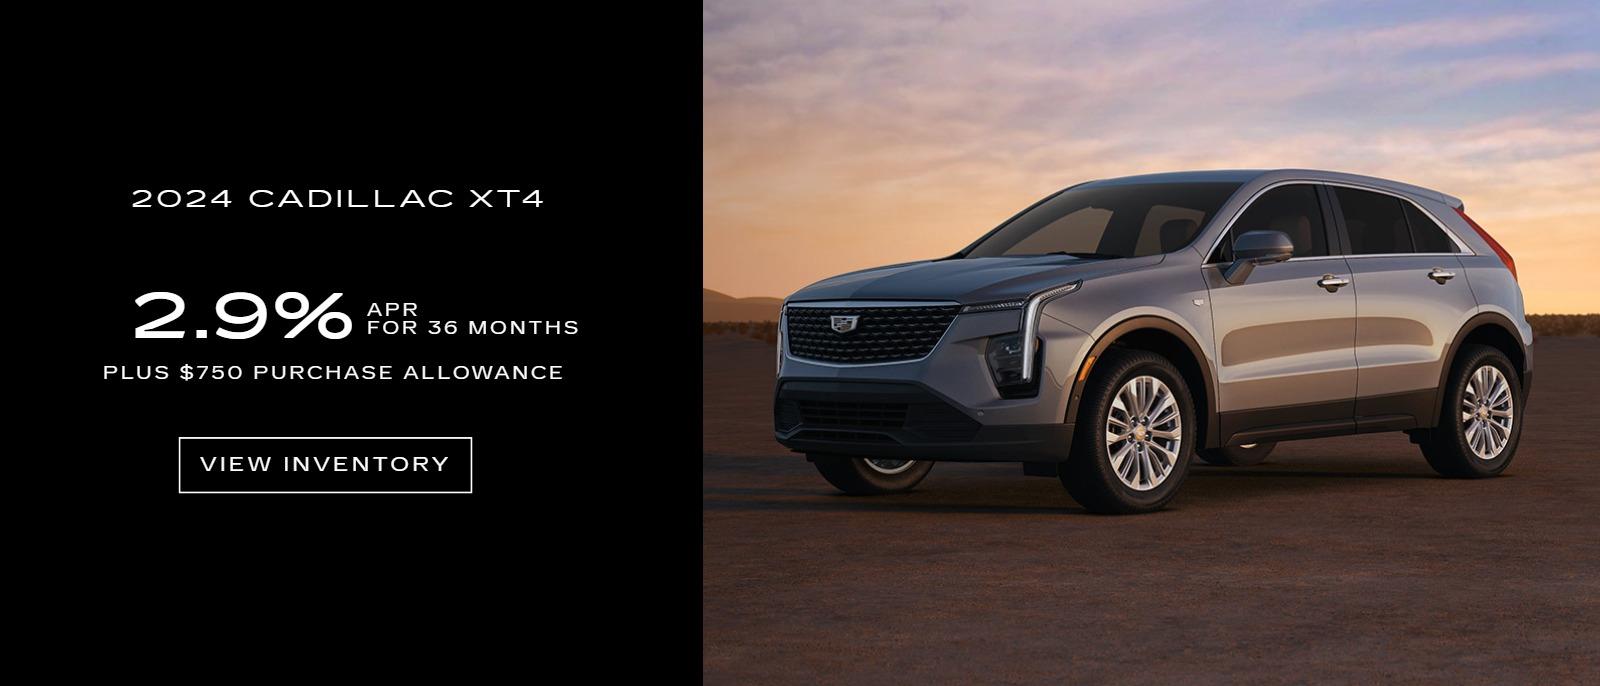 2024 CADILLAC XT4
2.9% APR for 36 months
Plus $750 Purchase Allowance